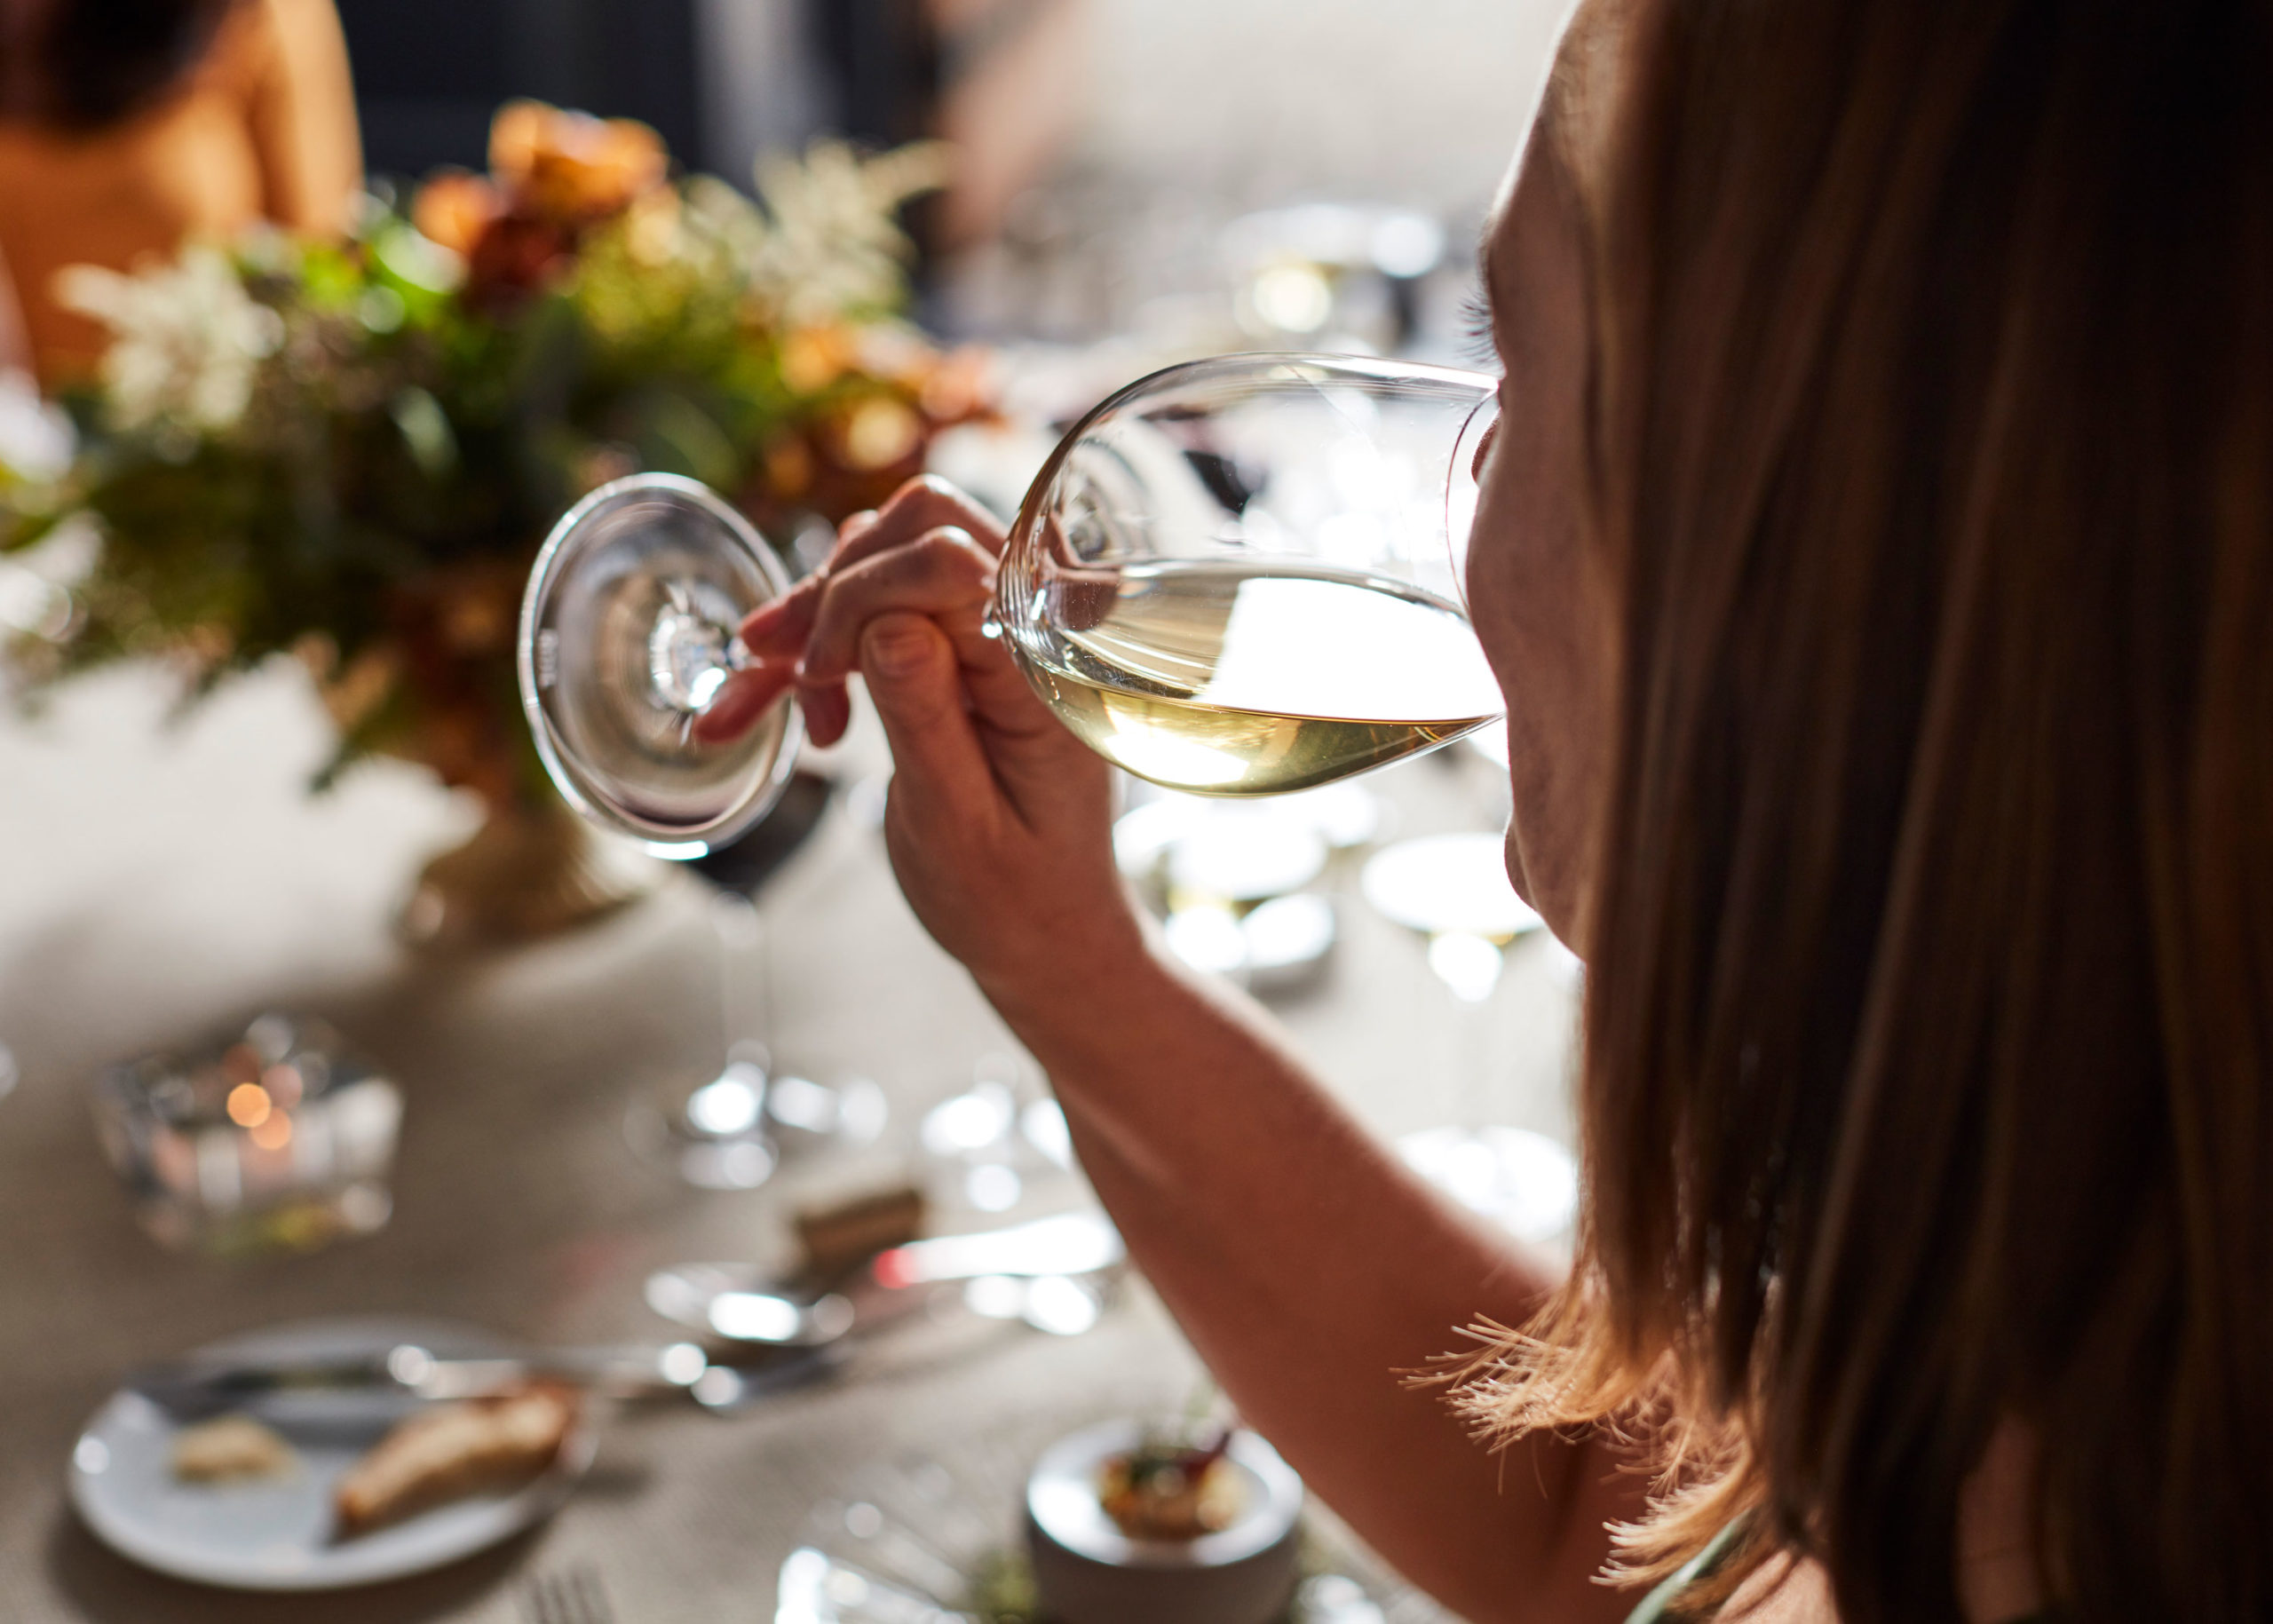 Person drinking Jordan Chardonnay with table setting in background